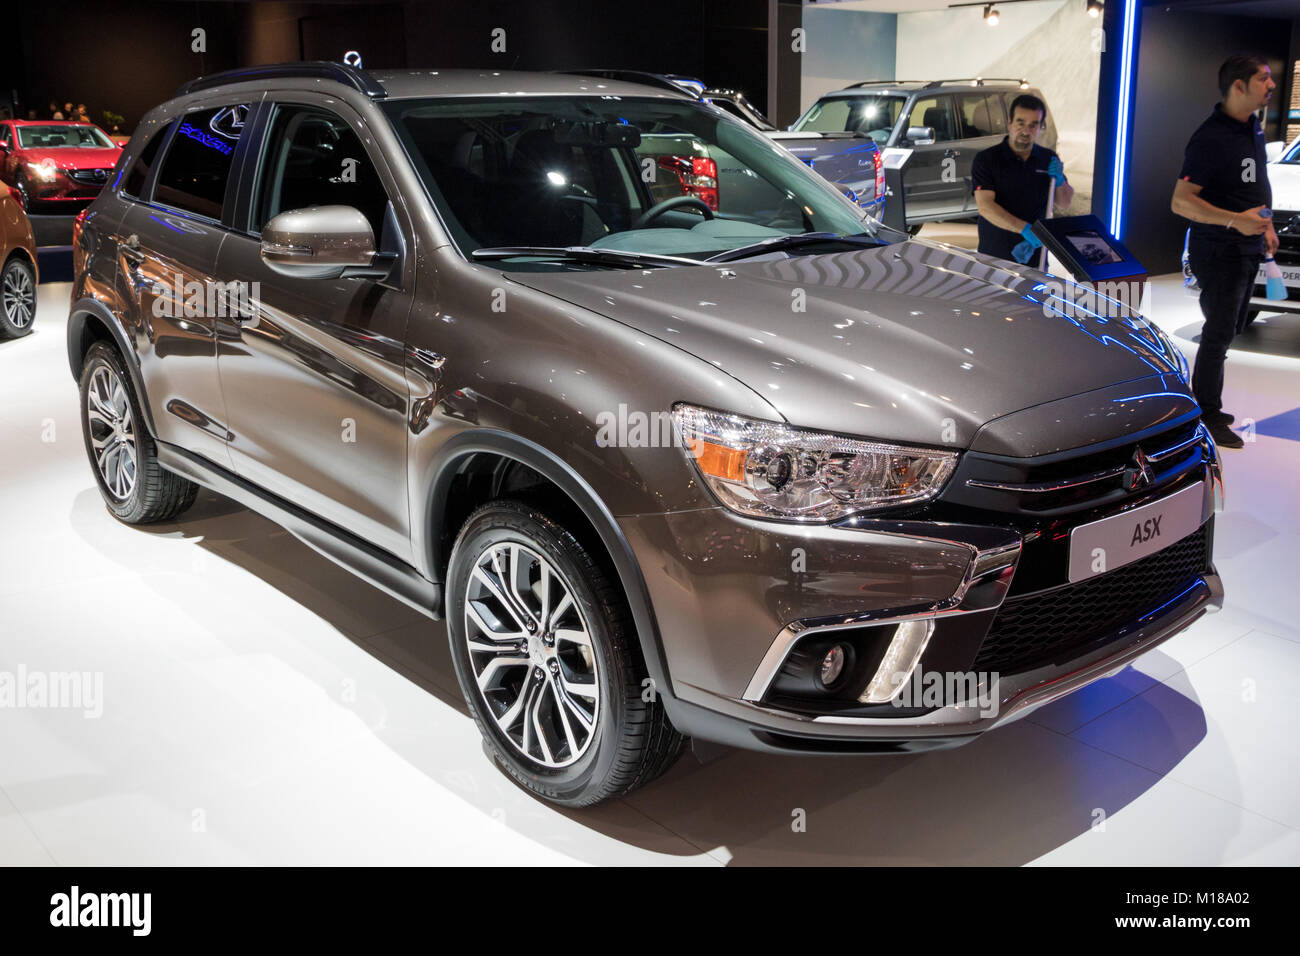 BRUSSELS - JAN 10, 2018: New Mitsubishi ASX compact SUV car shown at the  Brussels Motor Show Stock Photo - Alamy